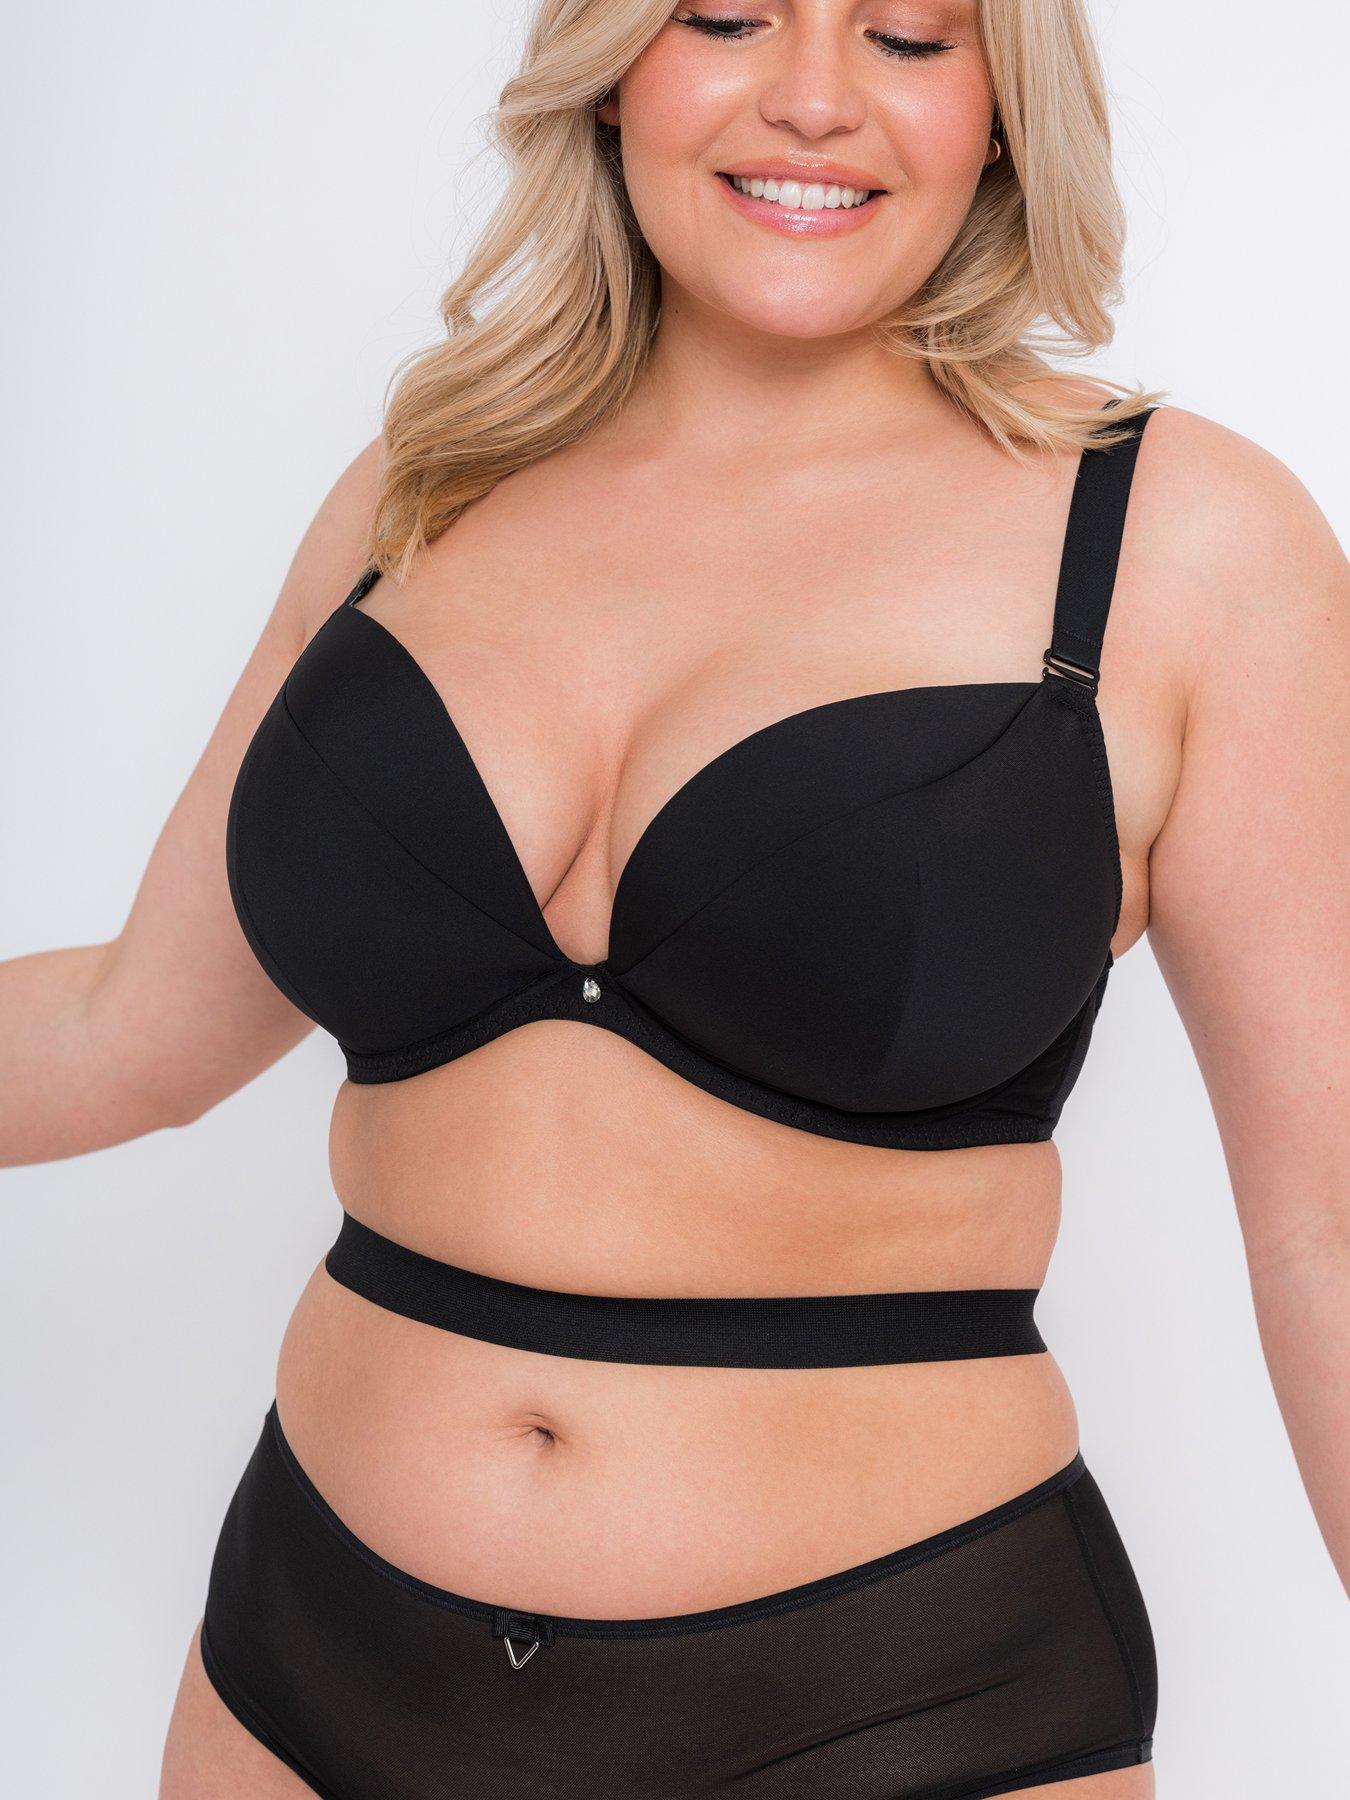 Bring It up Breast Shapers - Nude C/d Cup 25 or More Uses for sale